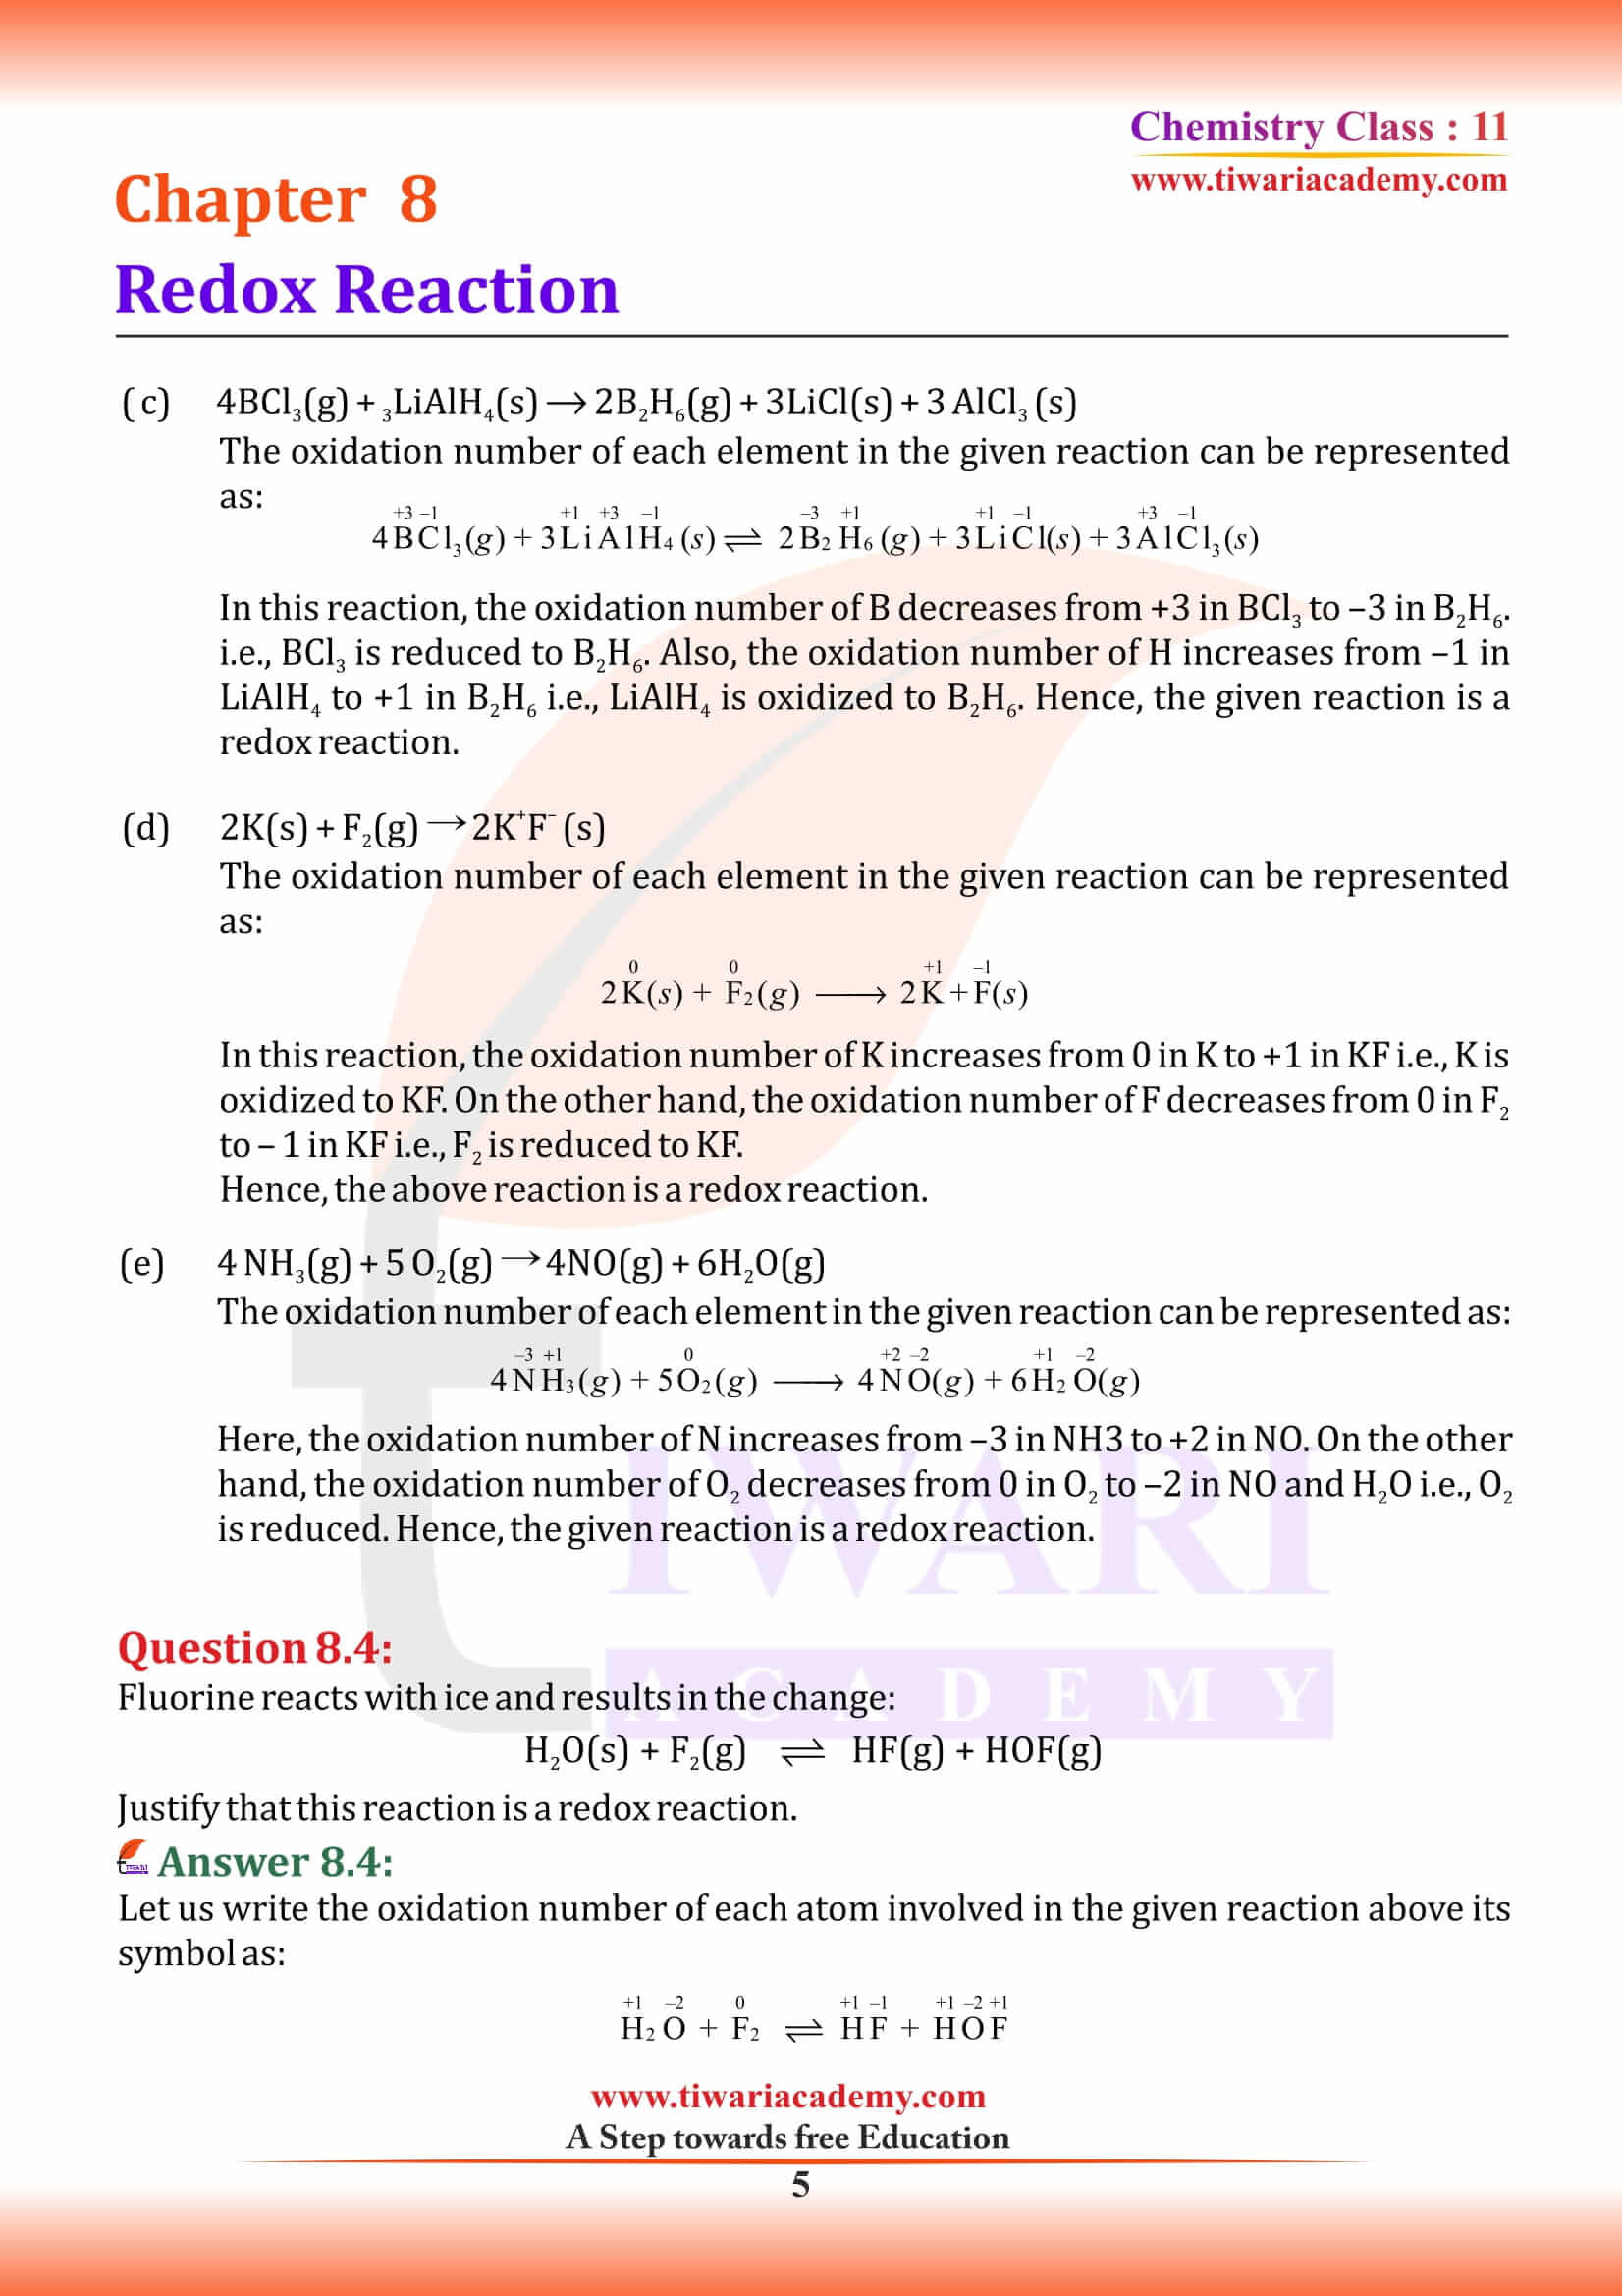 NCERT Solutions for Class 11 Chemistry Chapter 8 in PDF format